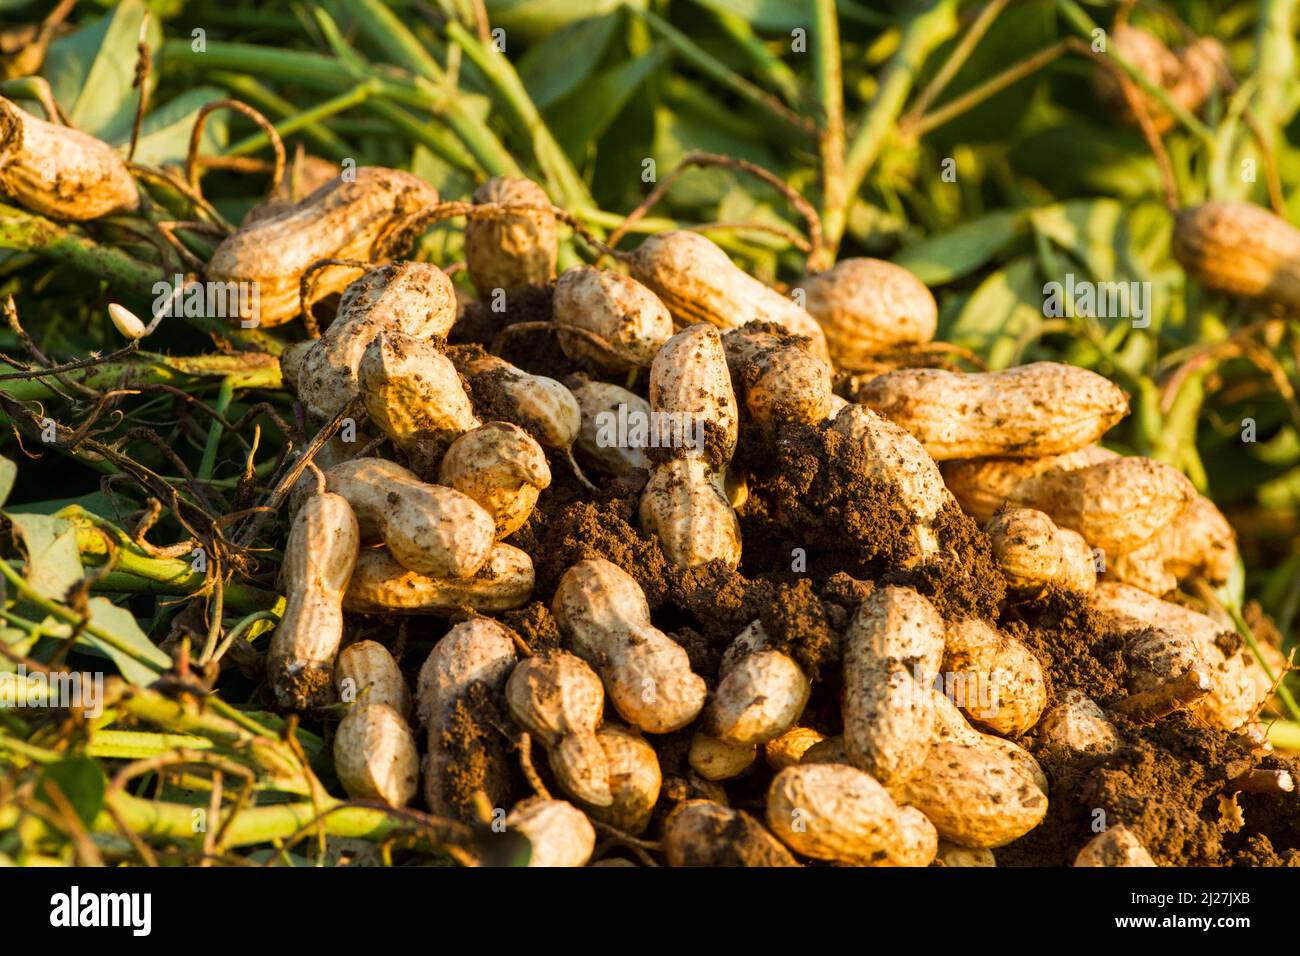 Peanuts after being picked from the ground Stock Photo